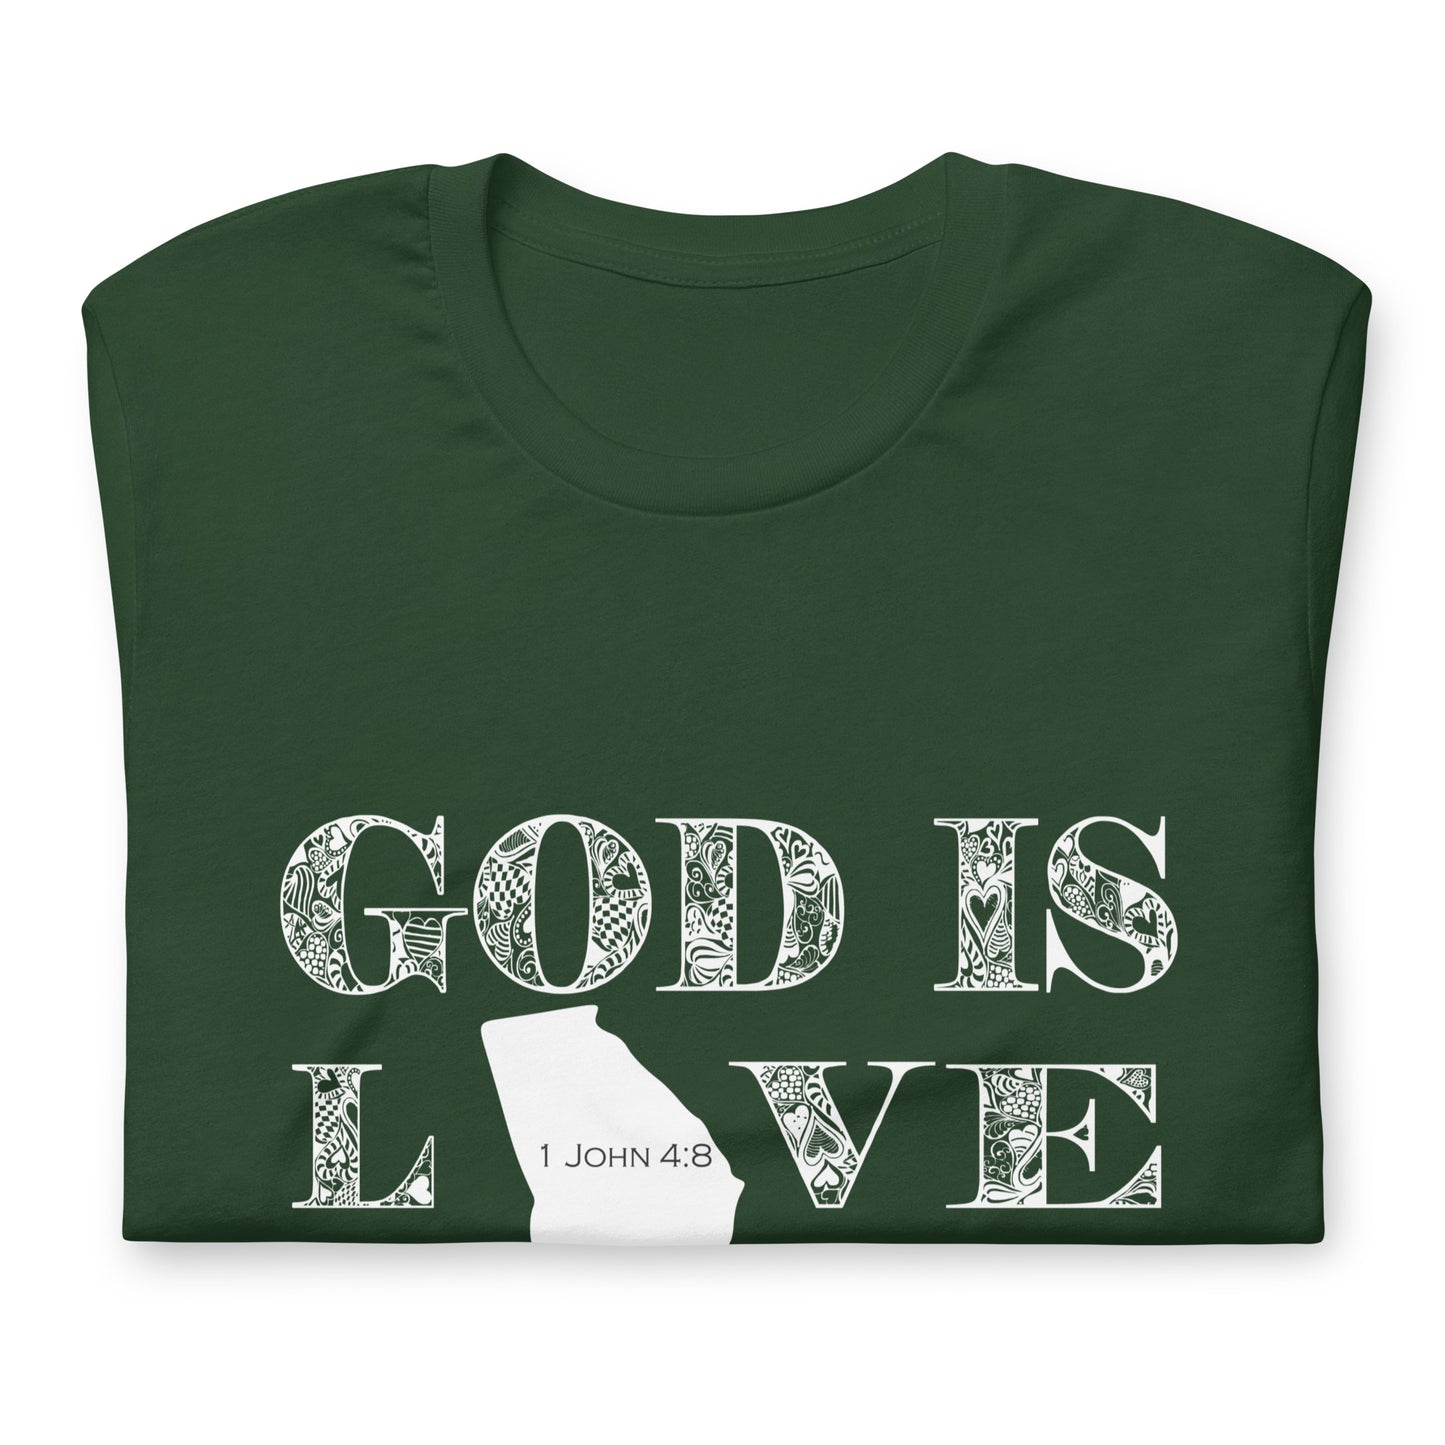 1 John 4:8 God is love Georgia T-shirt in Forest - folded front view